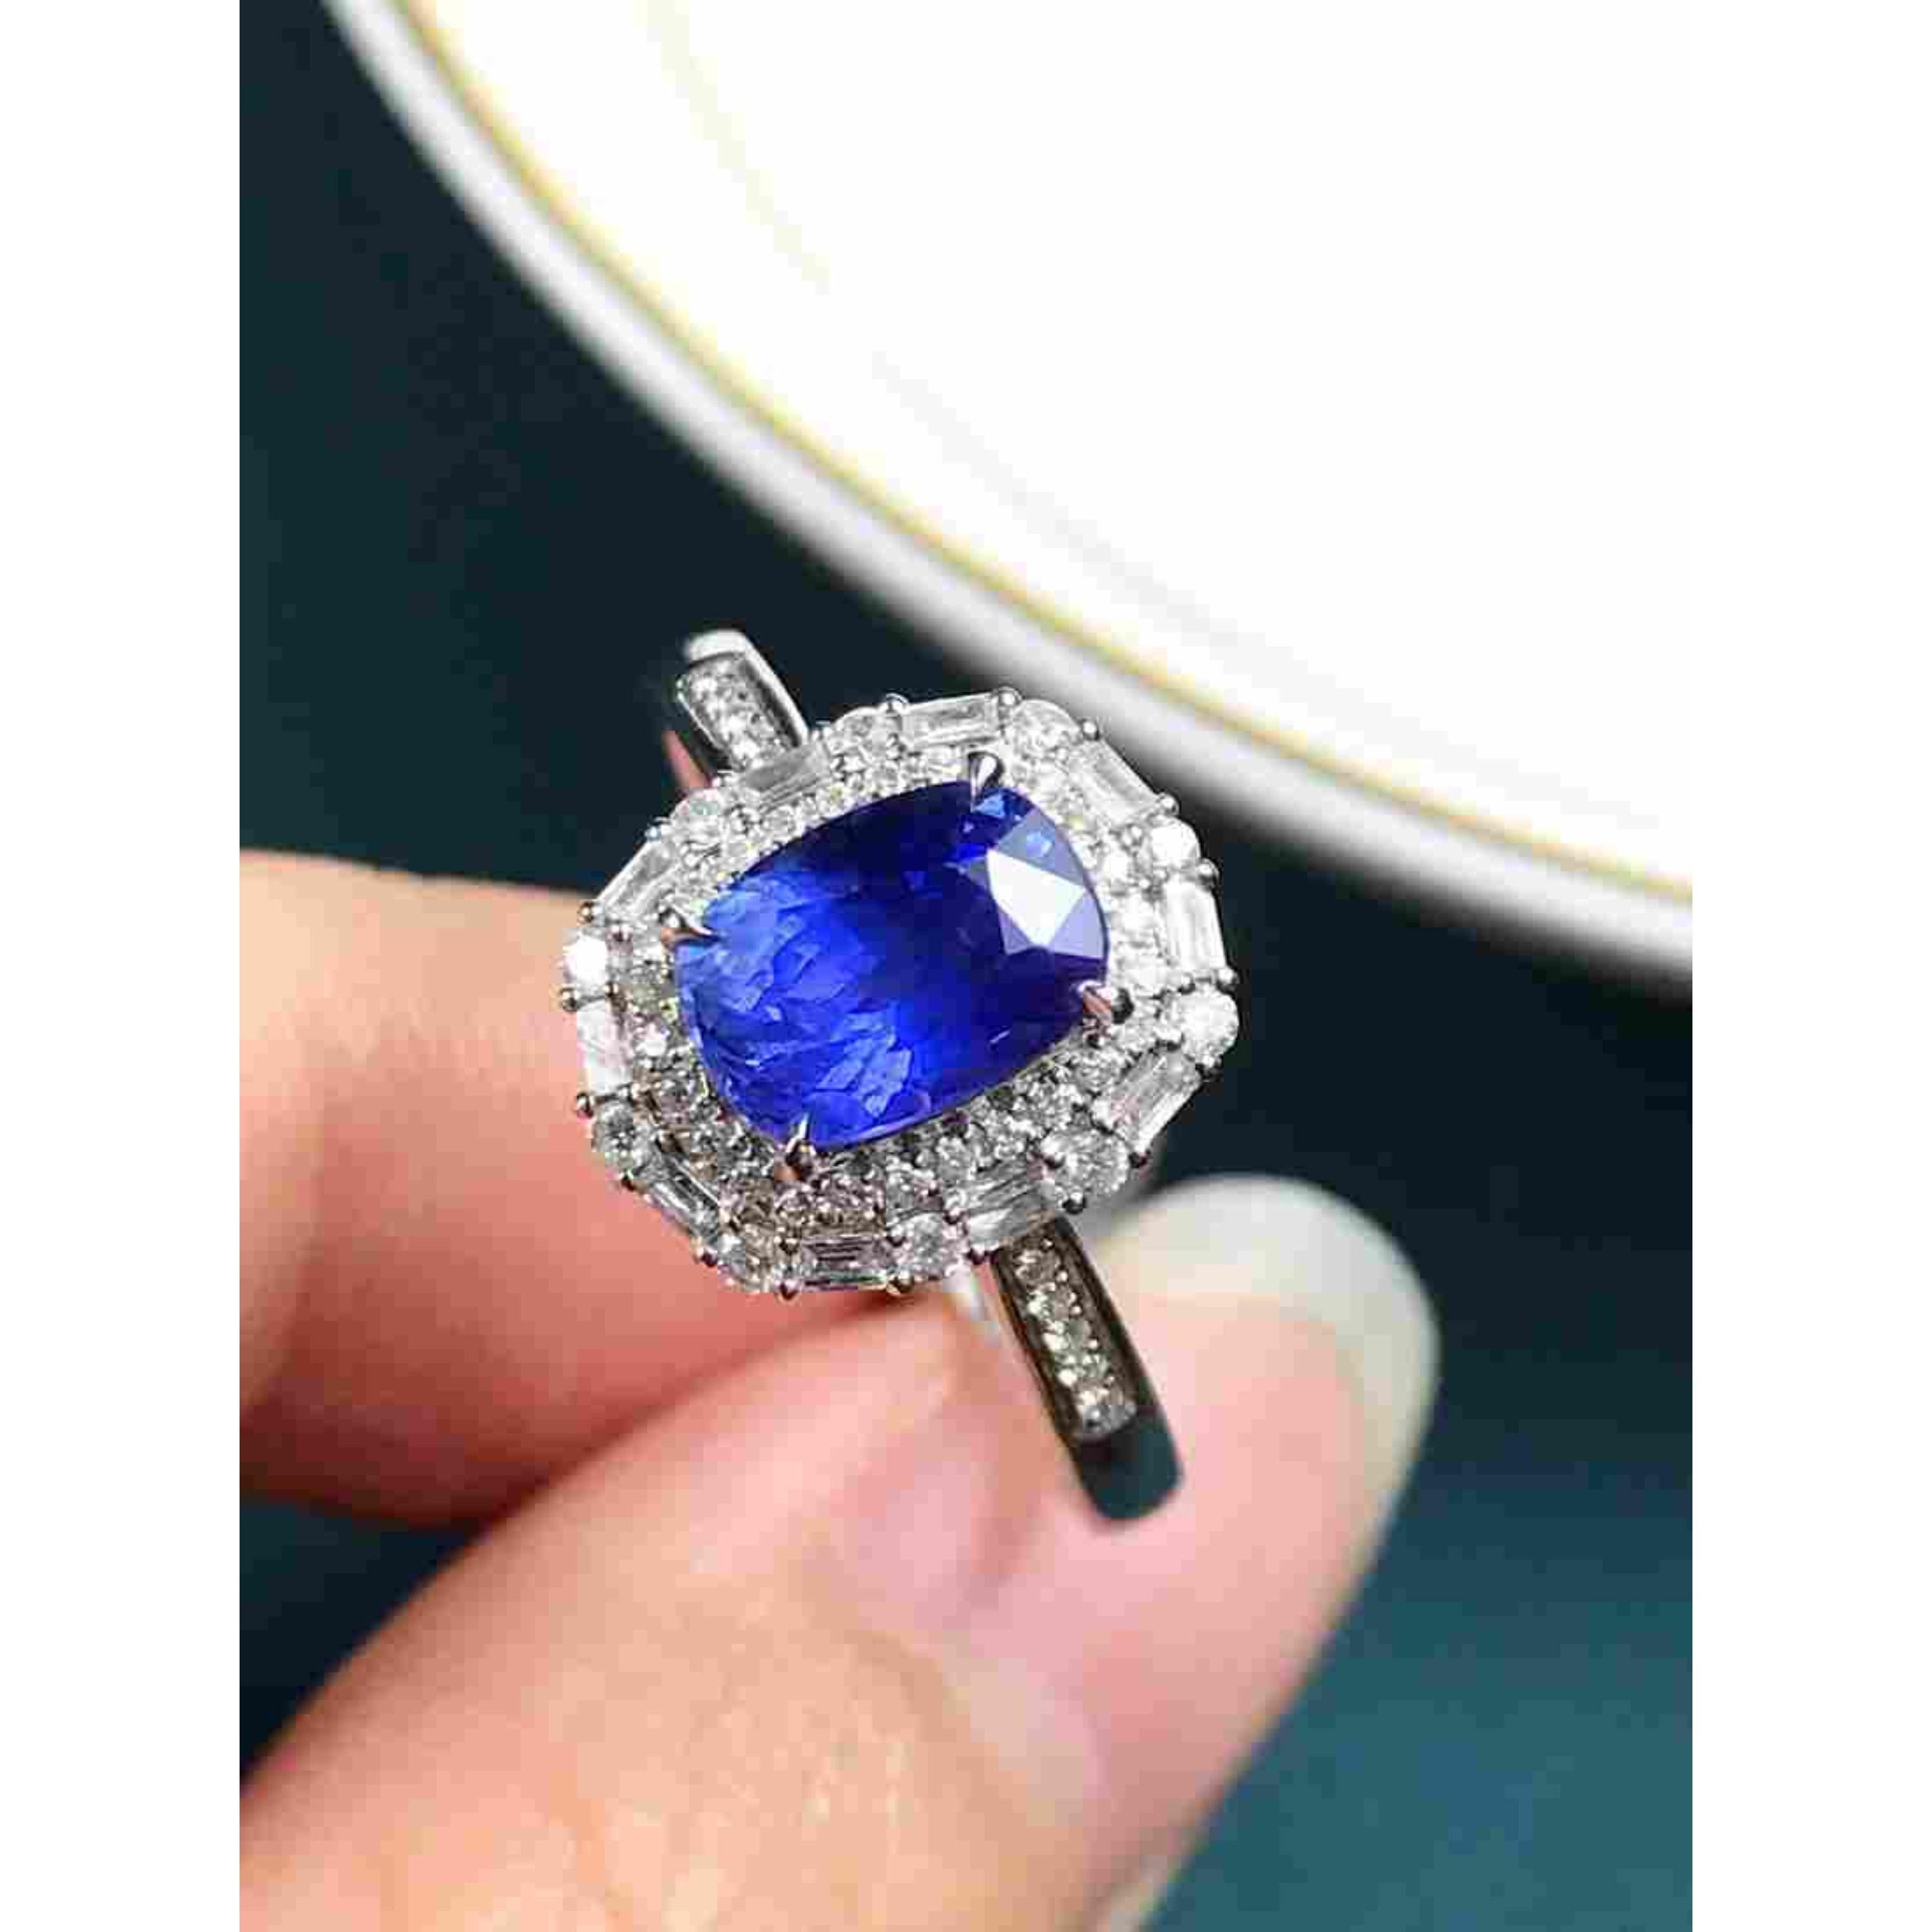 For Sale:  Natural Cushion Cut Sapphire Engagement Ring, Diamond Wedding Ring 2